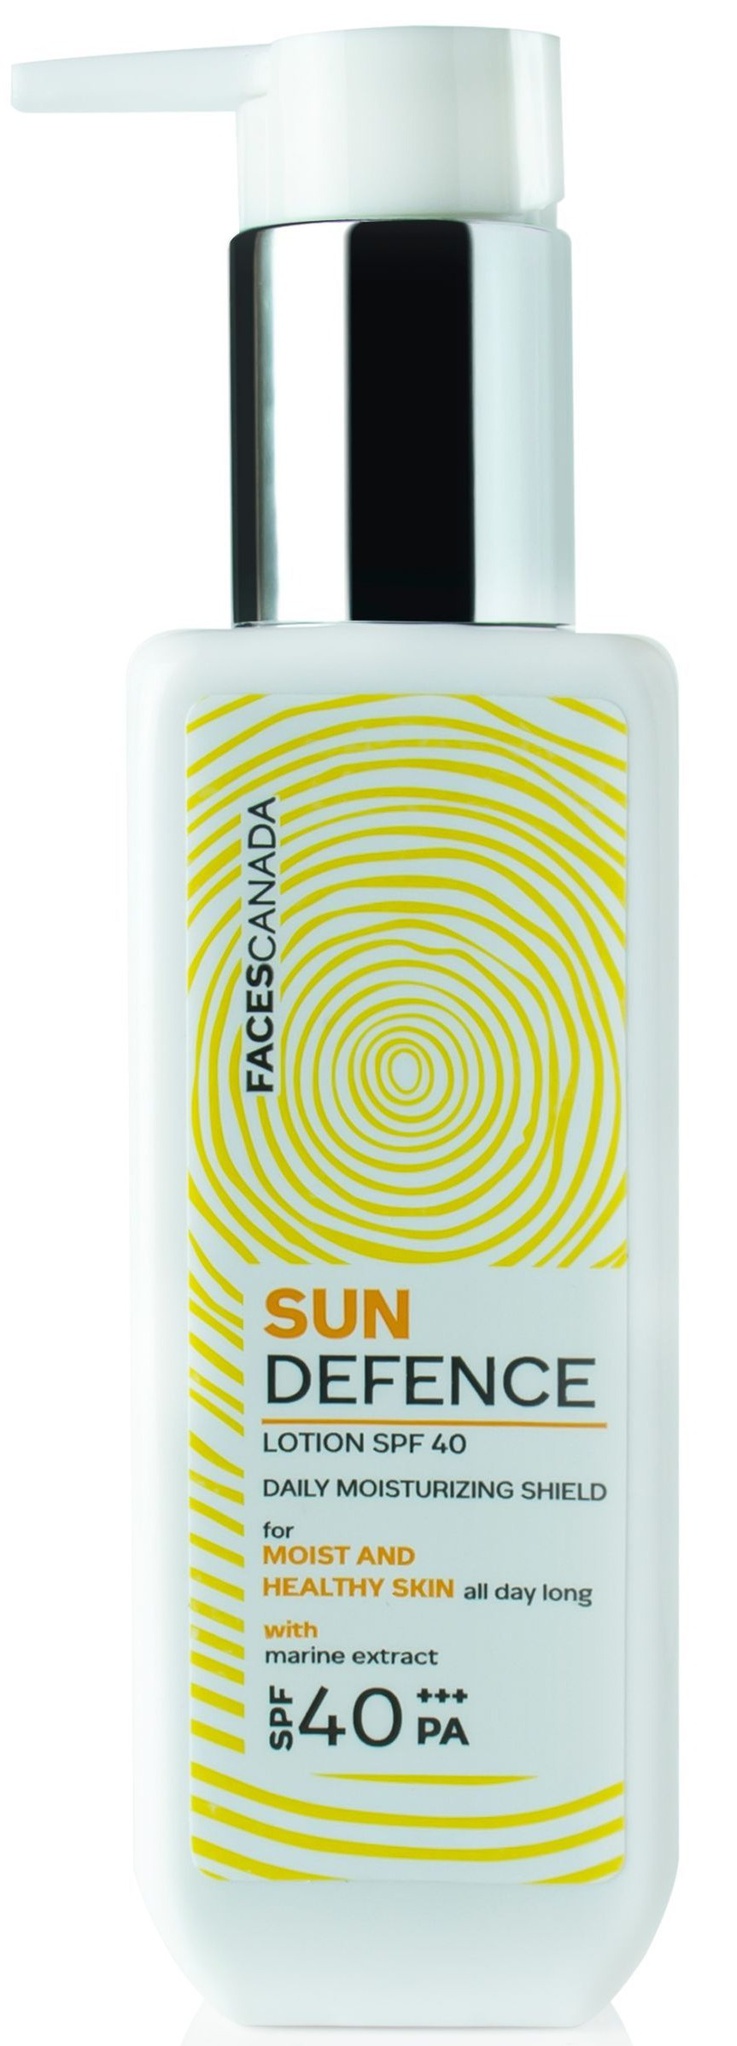 Faces Canada Sun Defence Lotion SPF 40